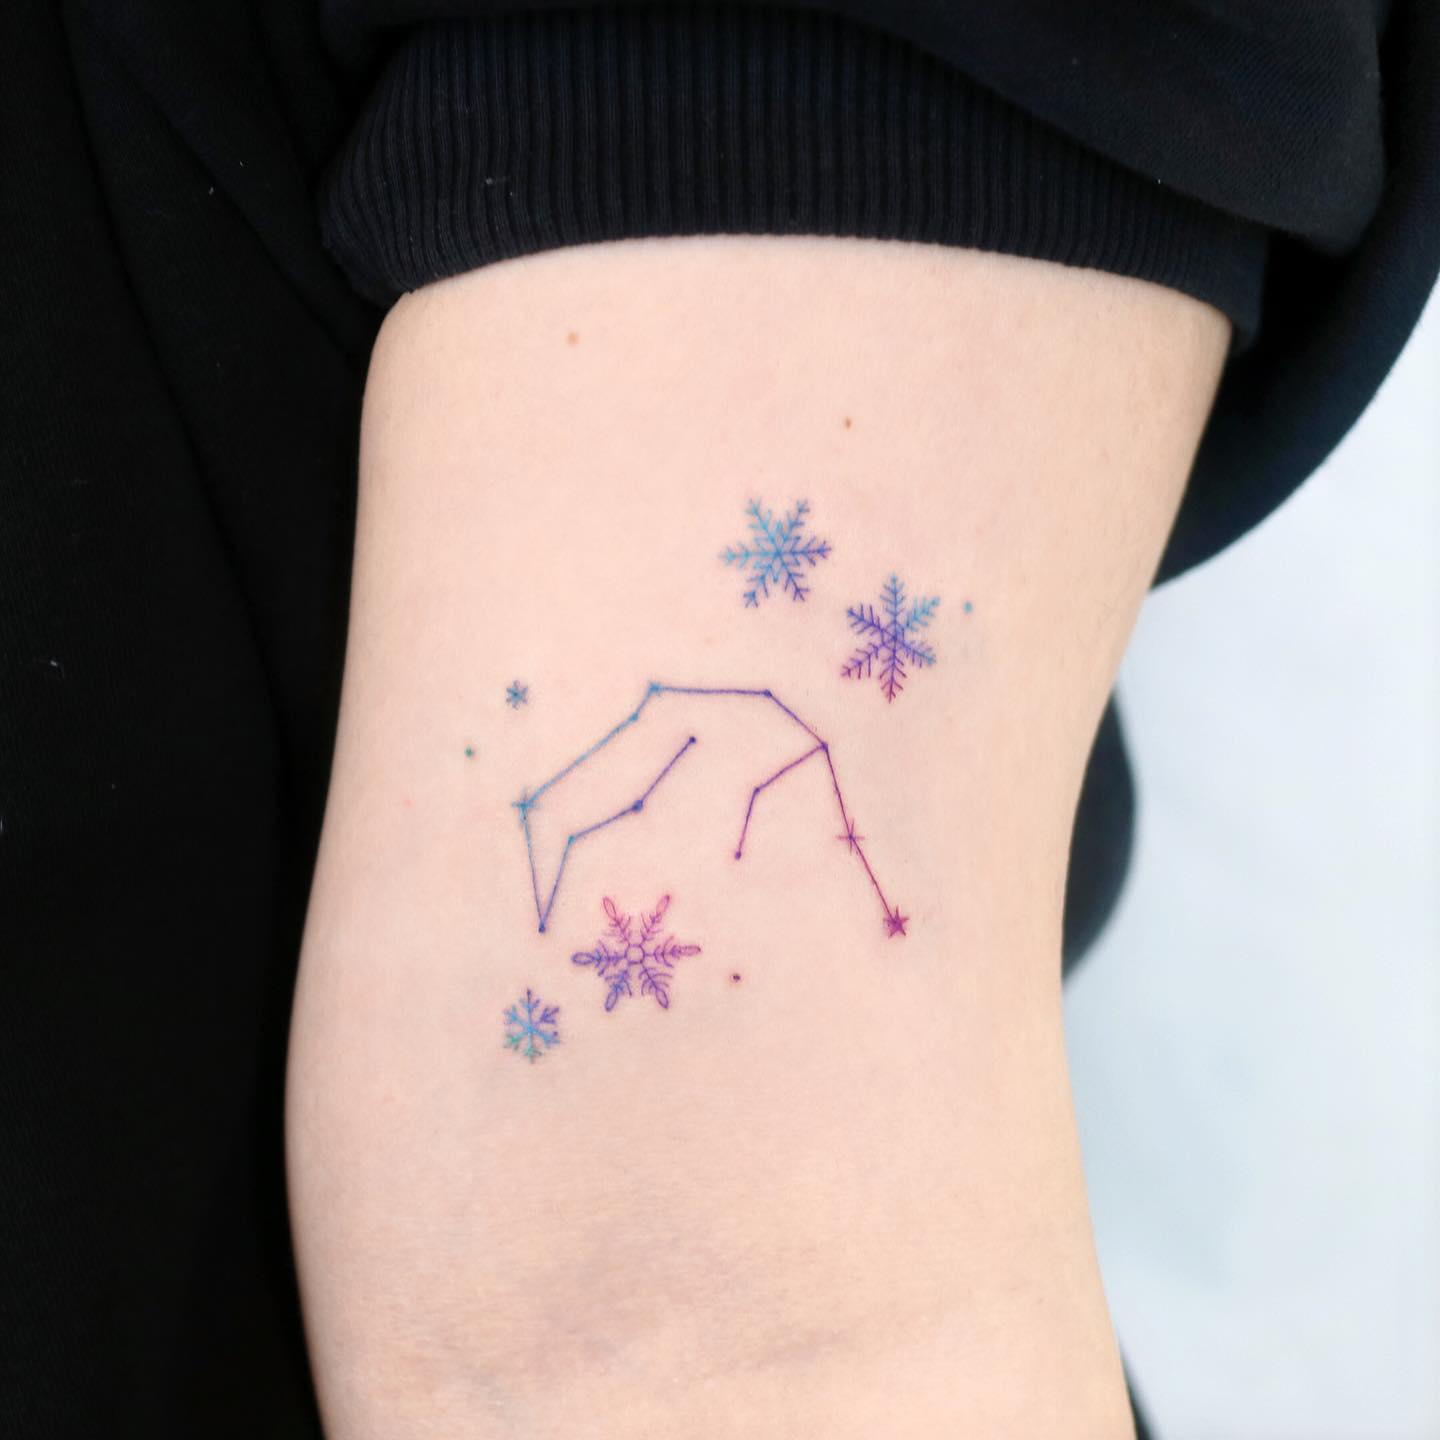 Colored snowflake tattoo by palette.tt